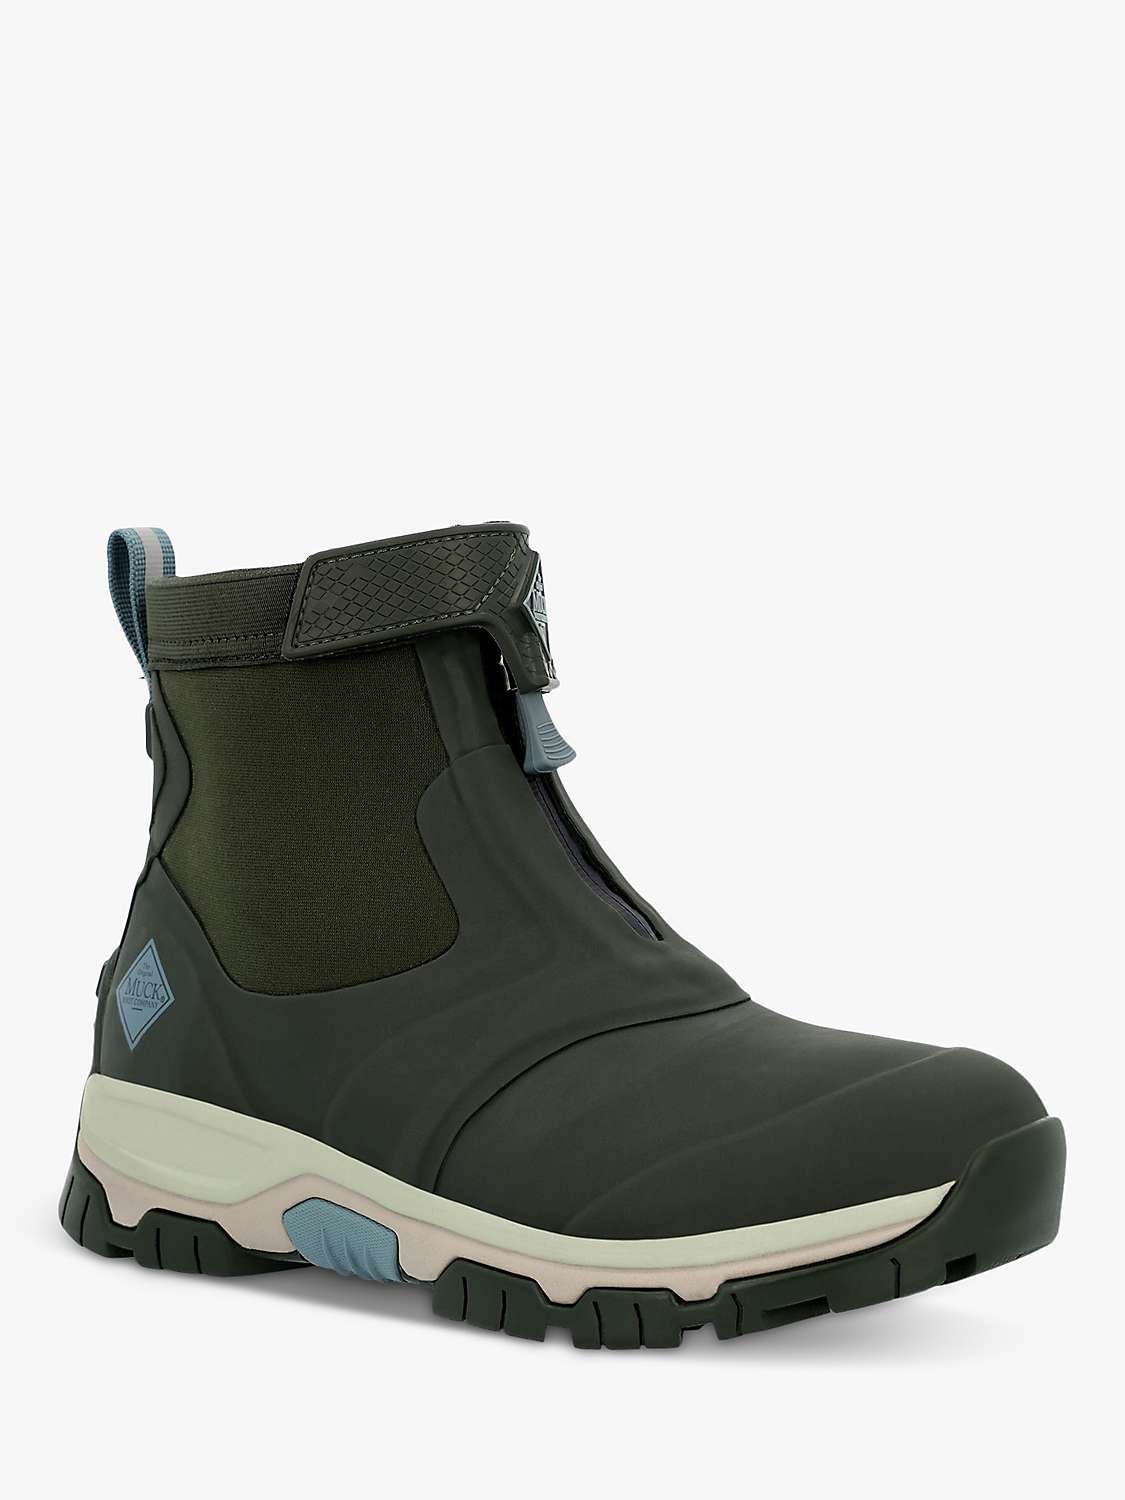 Buy Muck Apex Zip Up Wellington Ankle Boots, Moss Online at johnlewis.com